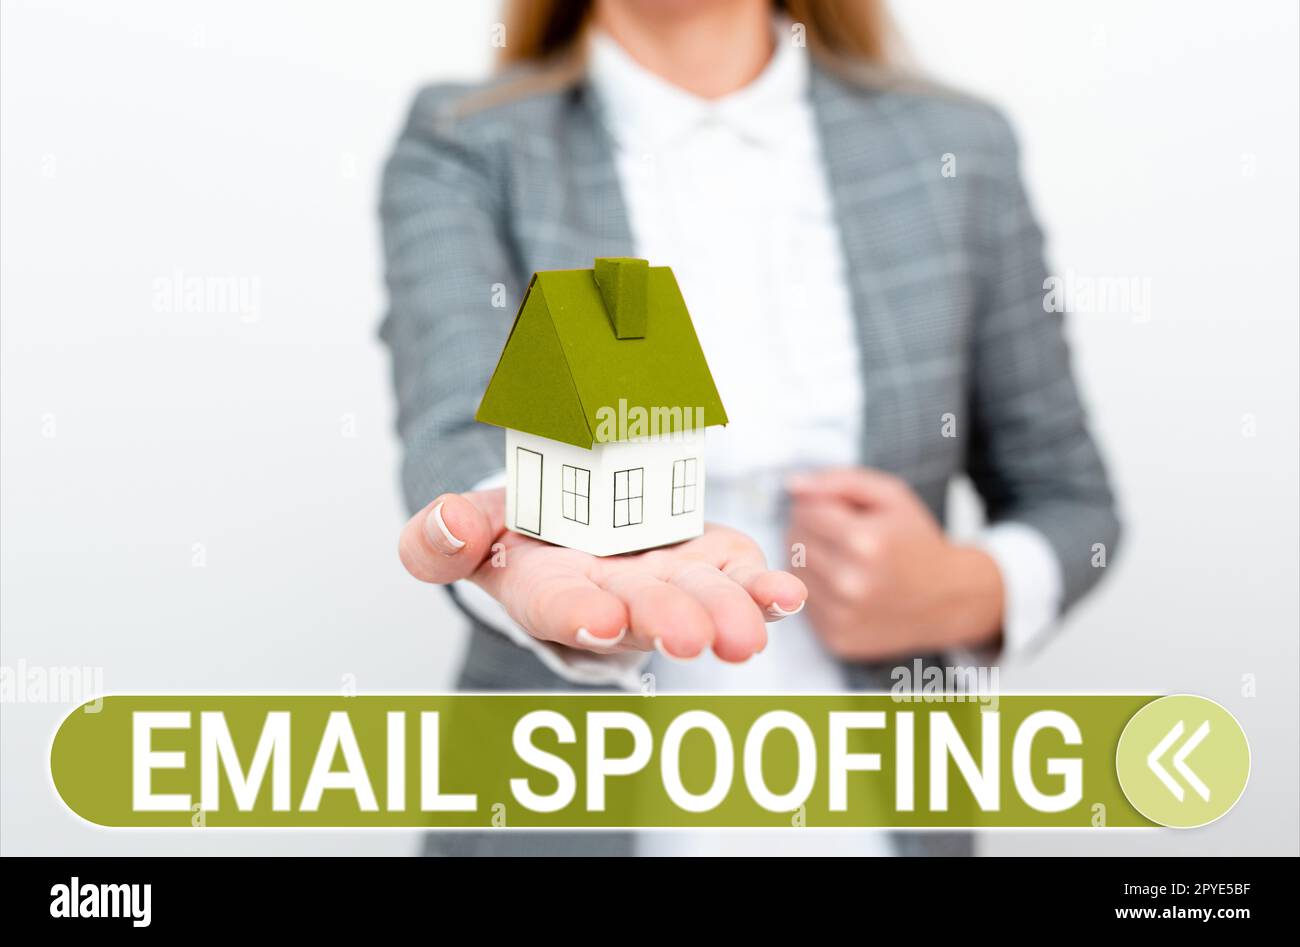 Hand writing sign Email Spoofing. Word Written on secure the access and content of an email account or service Stock Photo